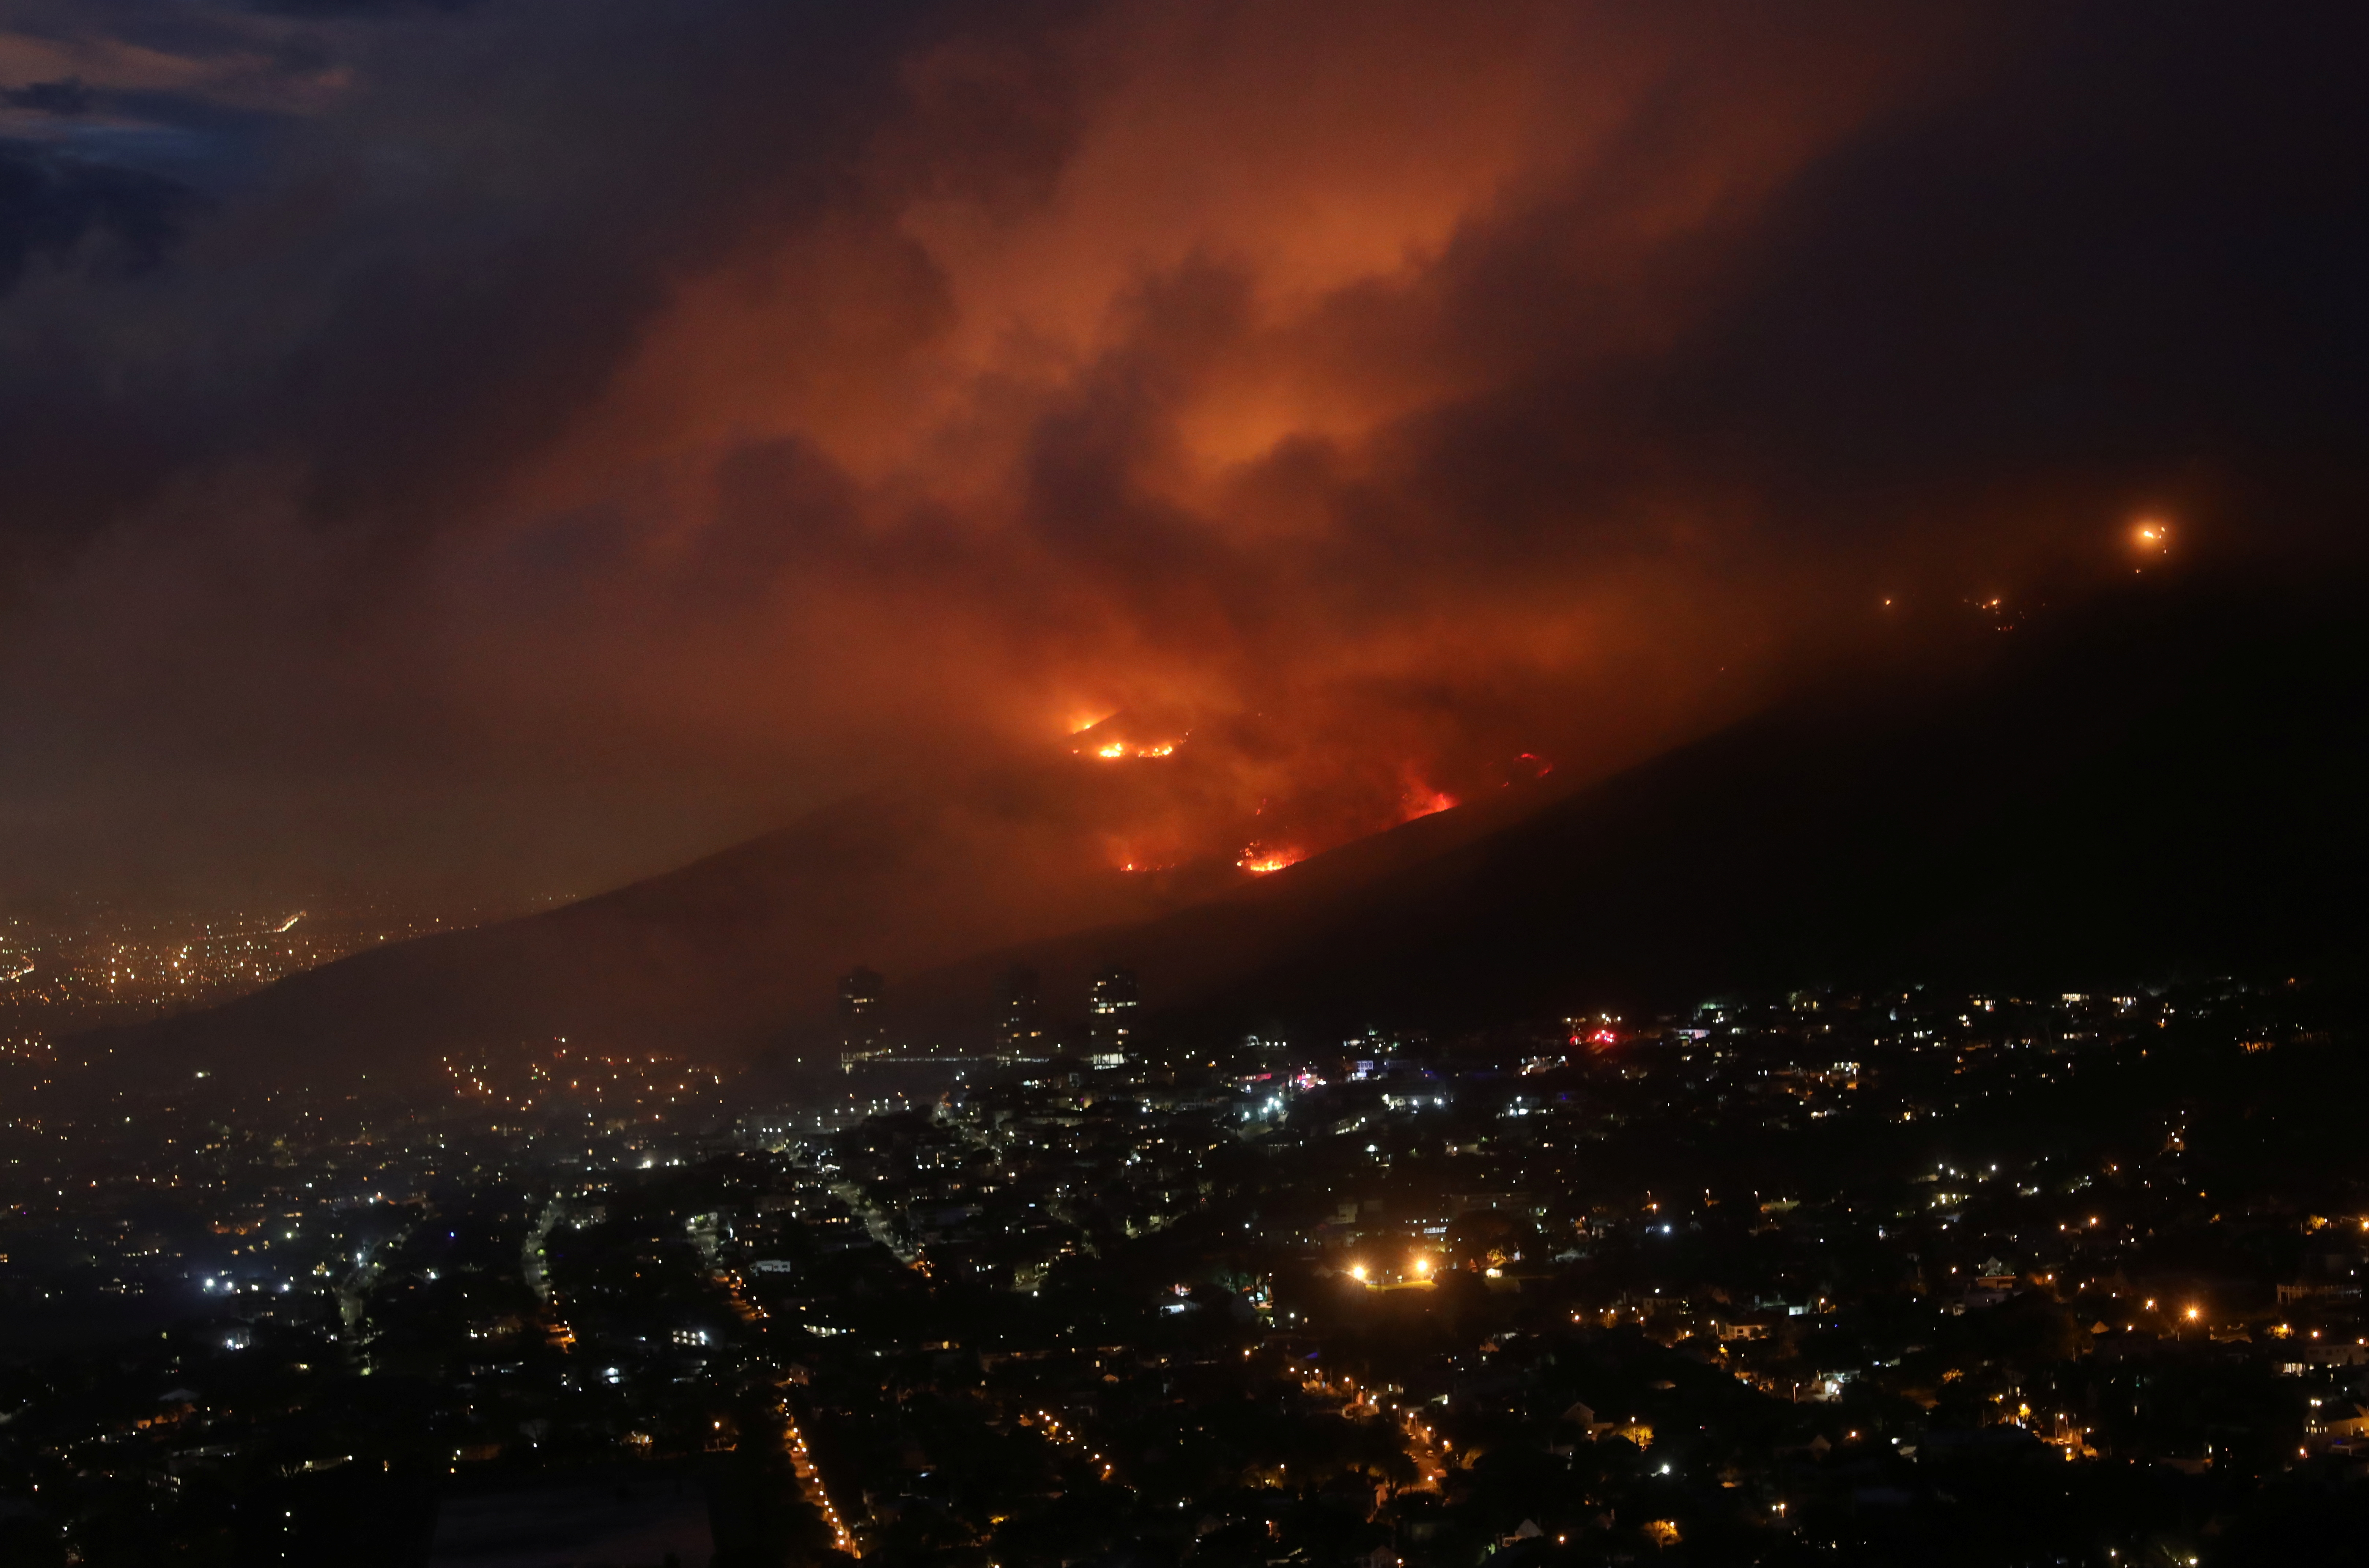 Flames are seen close to the city fanned by strong winds after  a bushfire  broke out on the slopes of Table Mountain in Cape Town, South Africa, April 19, 2021. REUTERS/Mike Hutchings